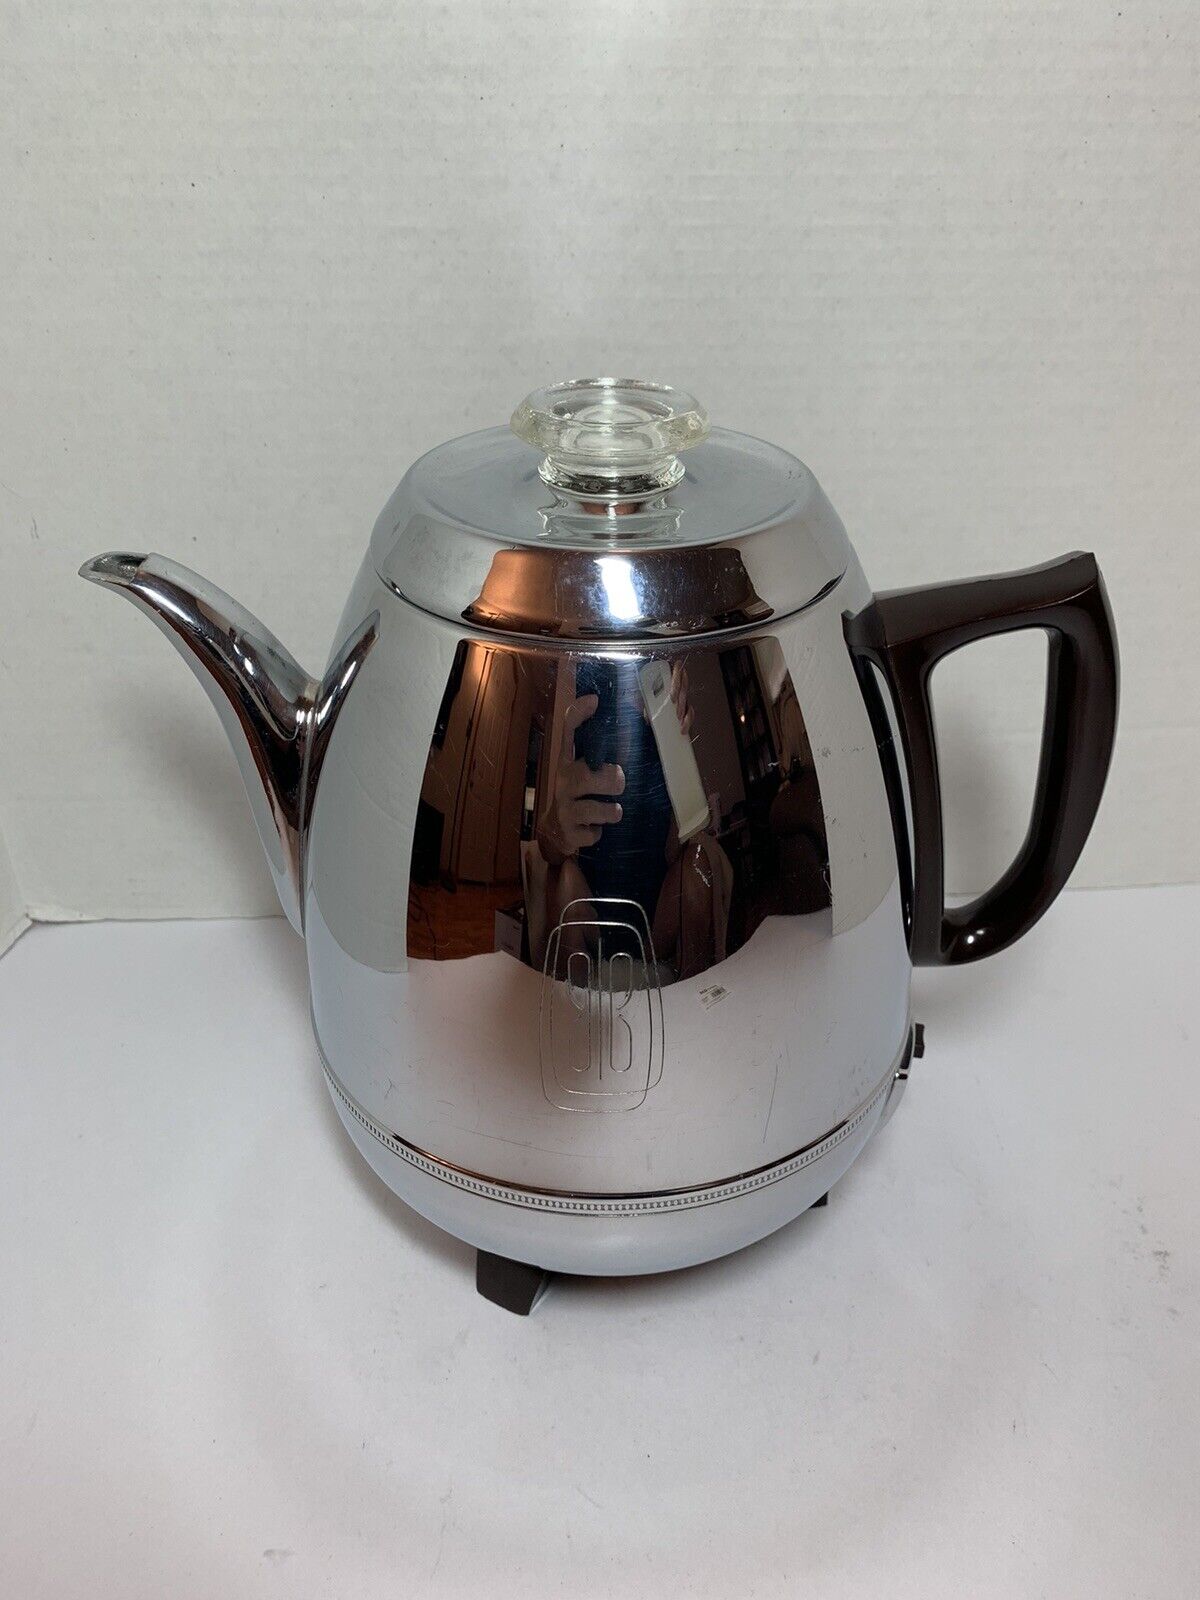 Vtg GENERAL ELECTRIC GE COFFEE MAKER/PERCOLATOR 13P30 Complete Pot Belly, Tested